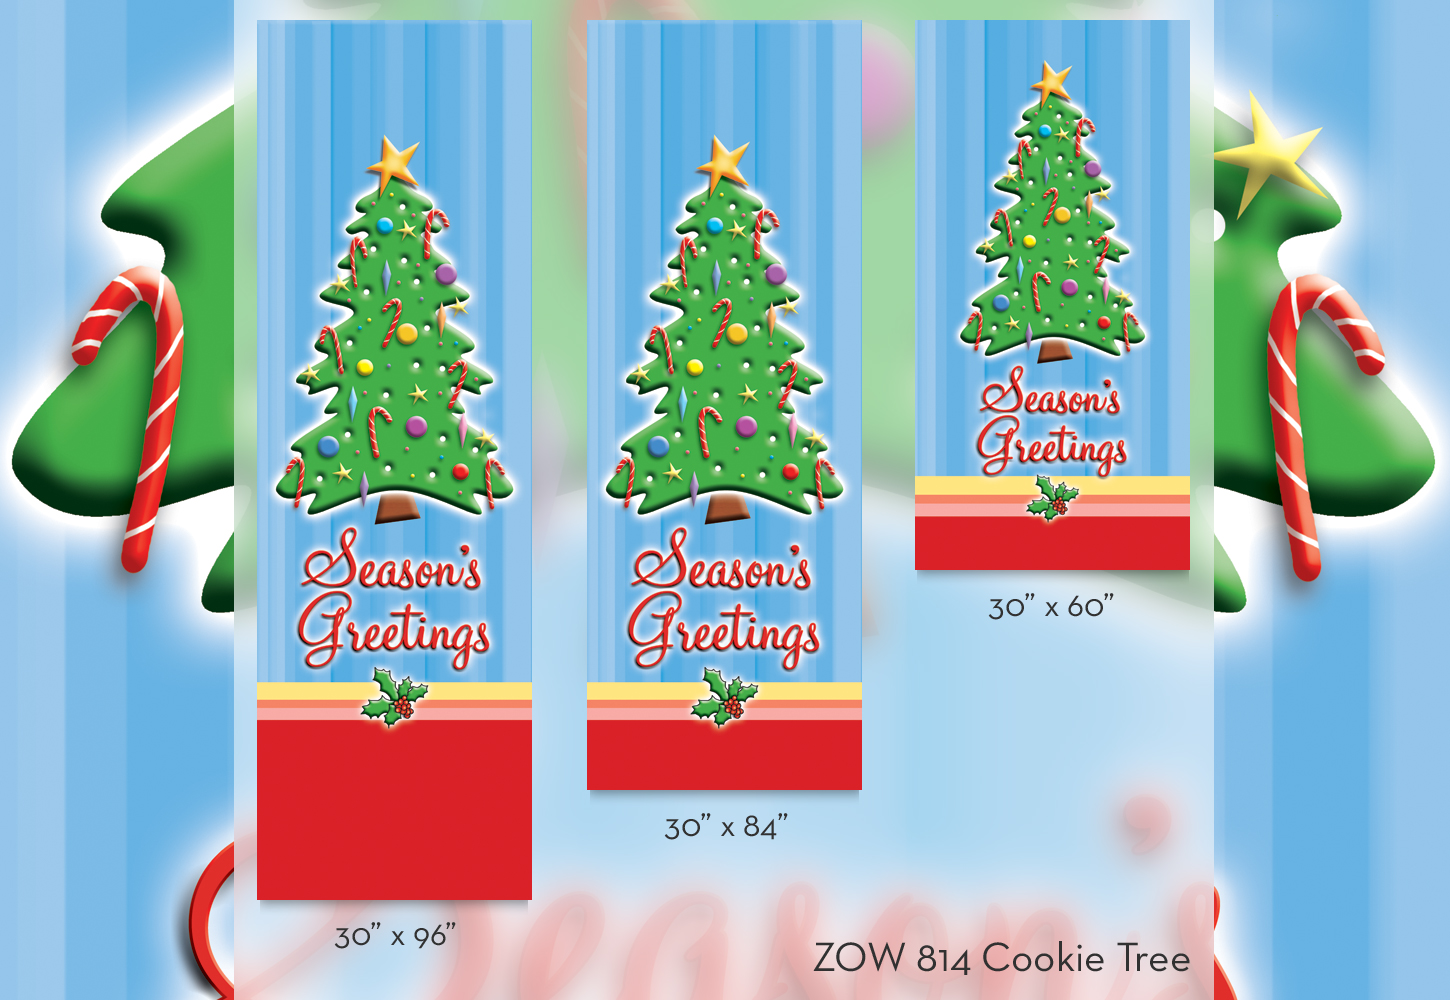 ZOW 814 Cookie Tree